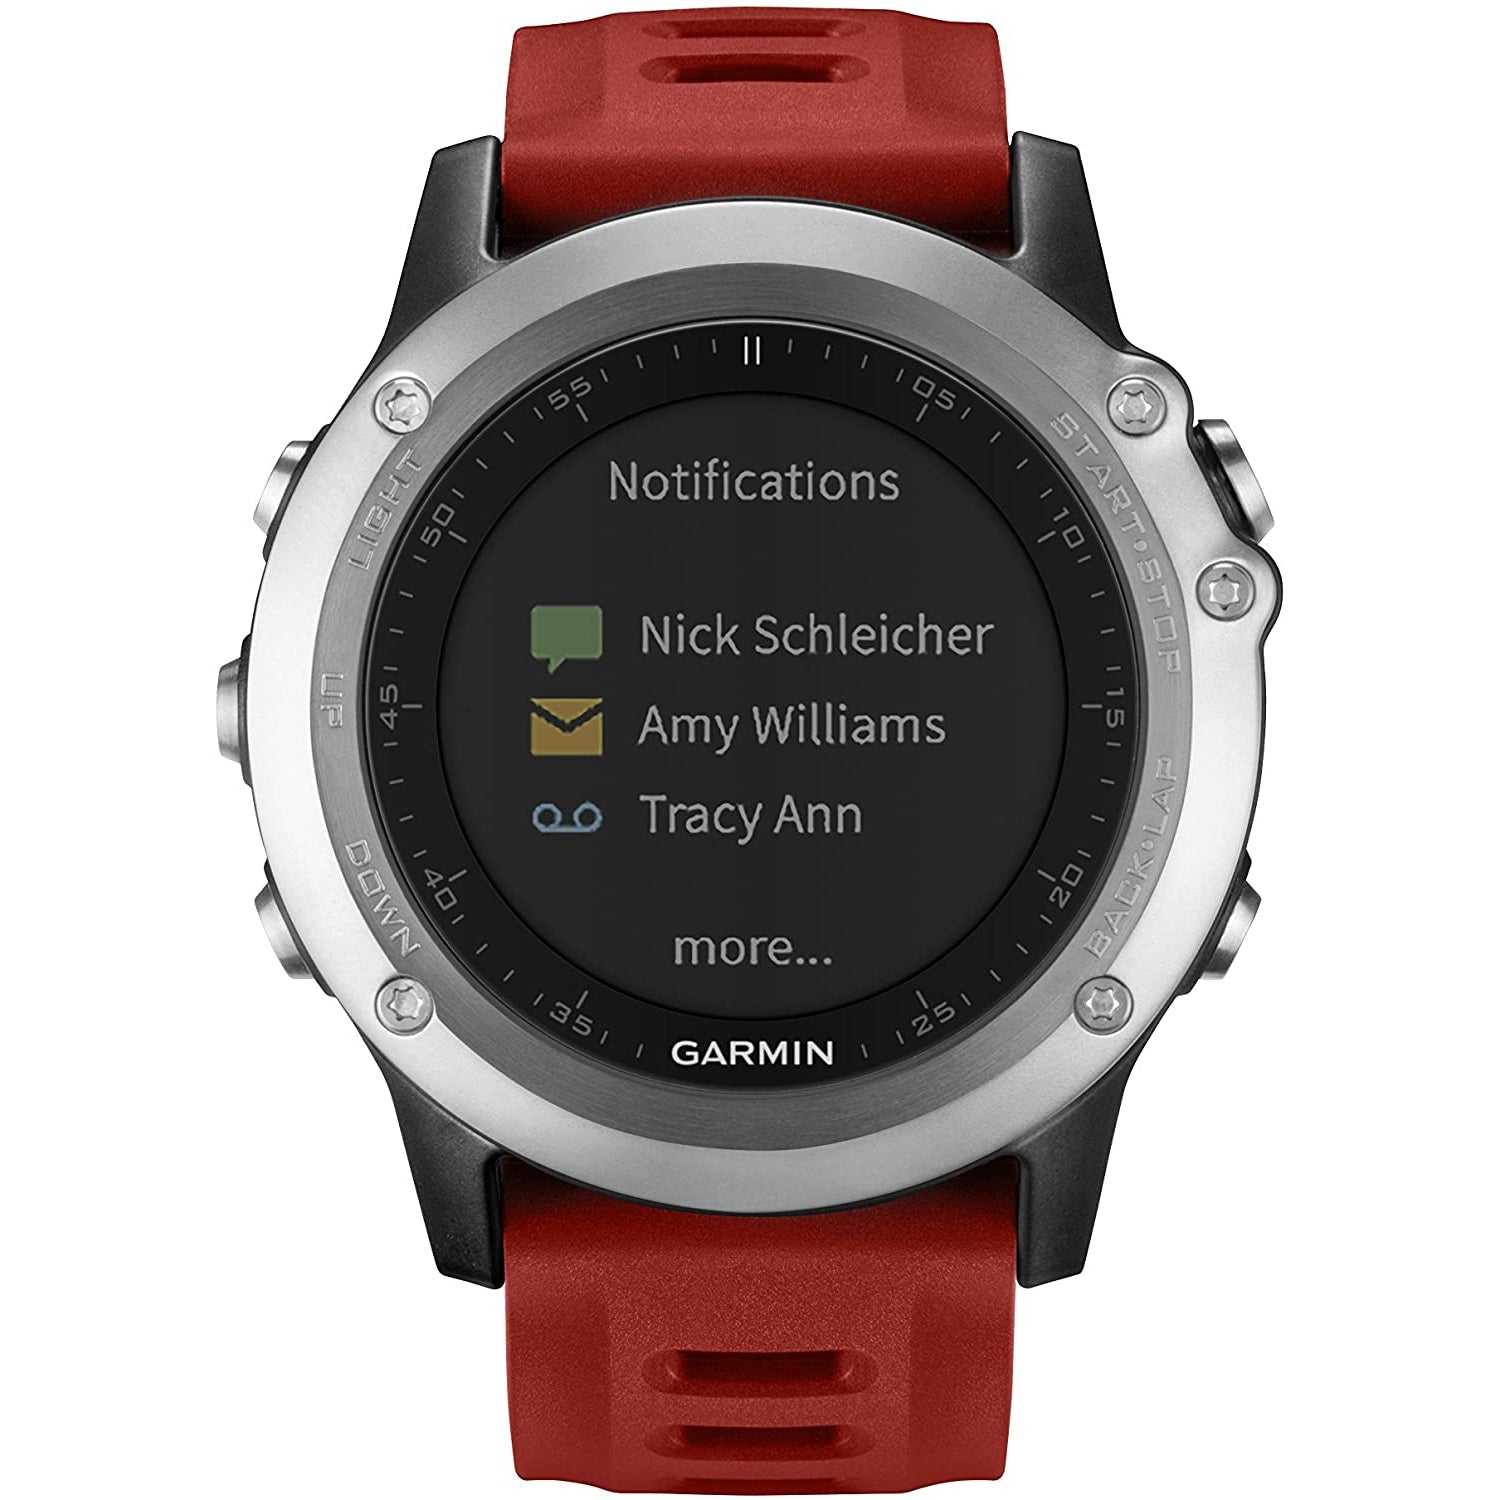 Garmin Fenix 3 GPS Multisport Watch with Outdoor Navigation - Silver With Red Strap